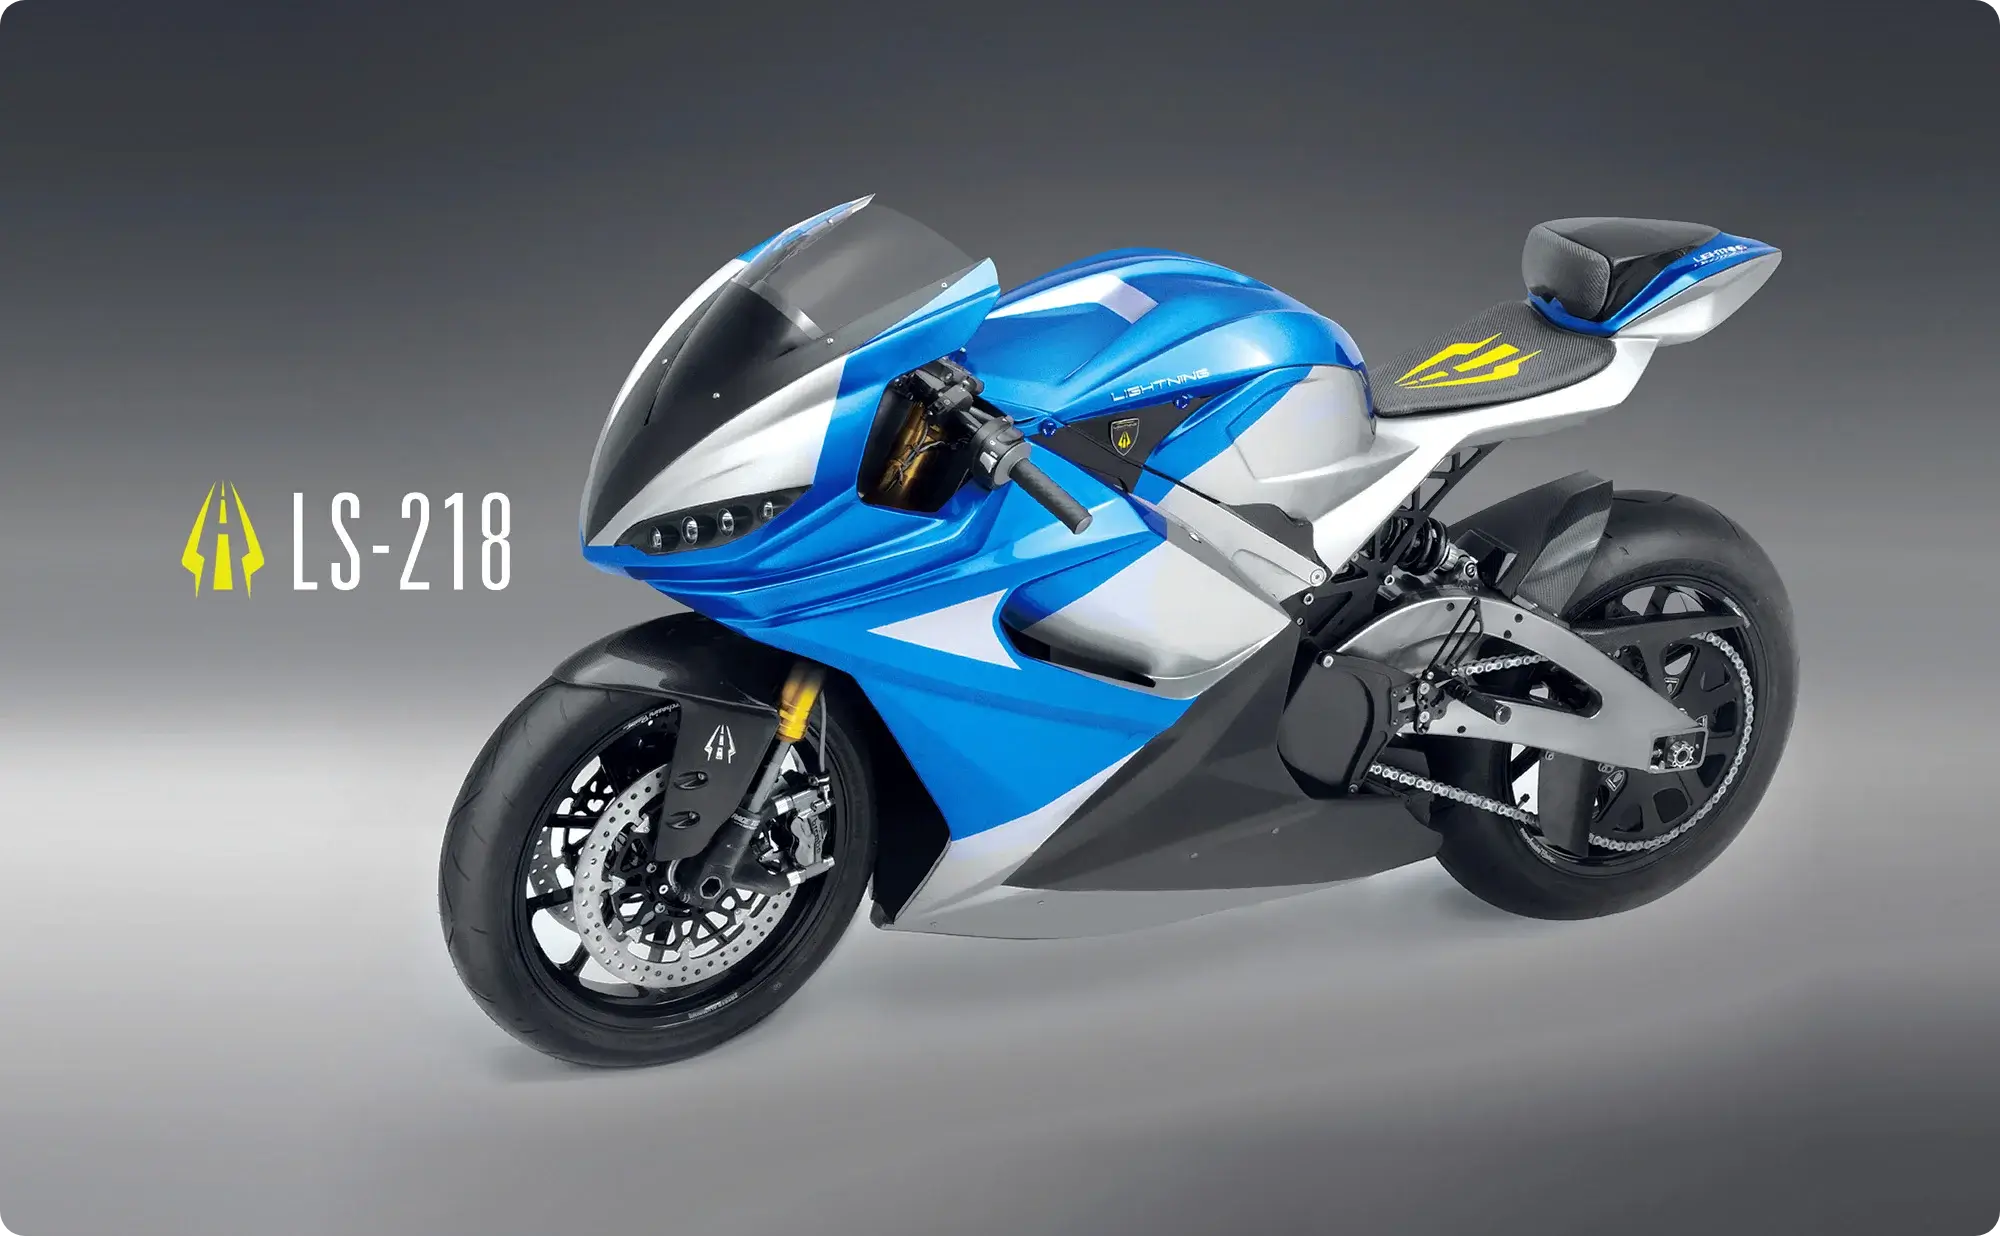 https://e-vehicleinfo.com/lightning-ls-218-electric-superbike-price-specifications/